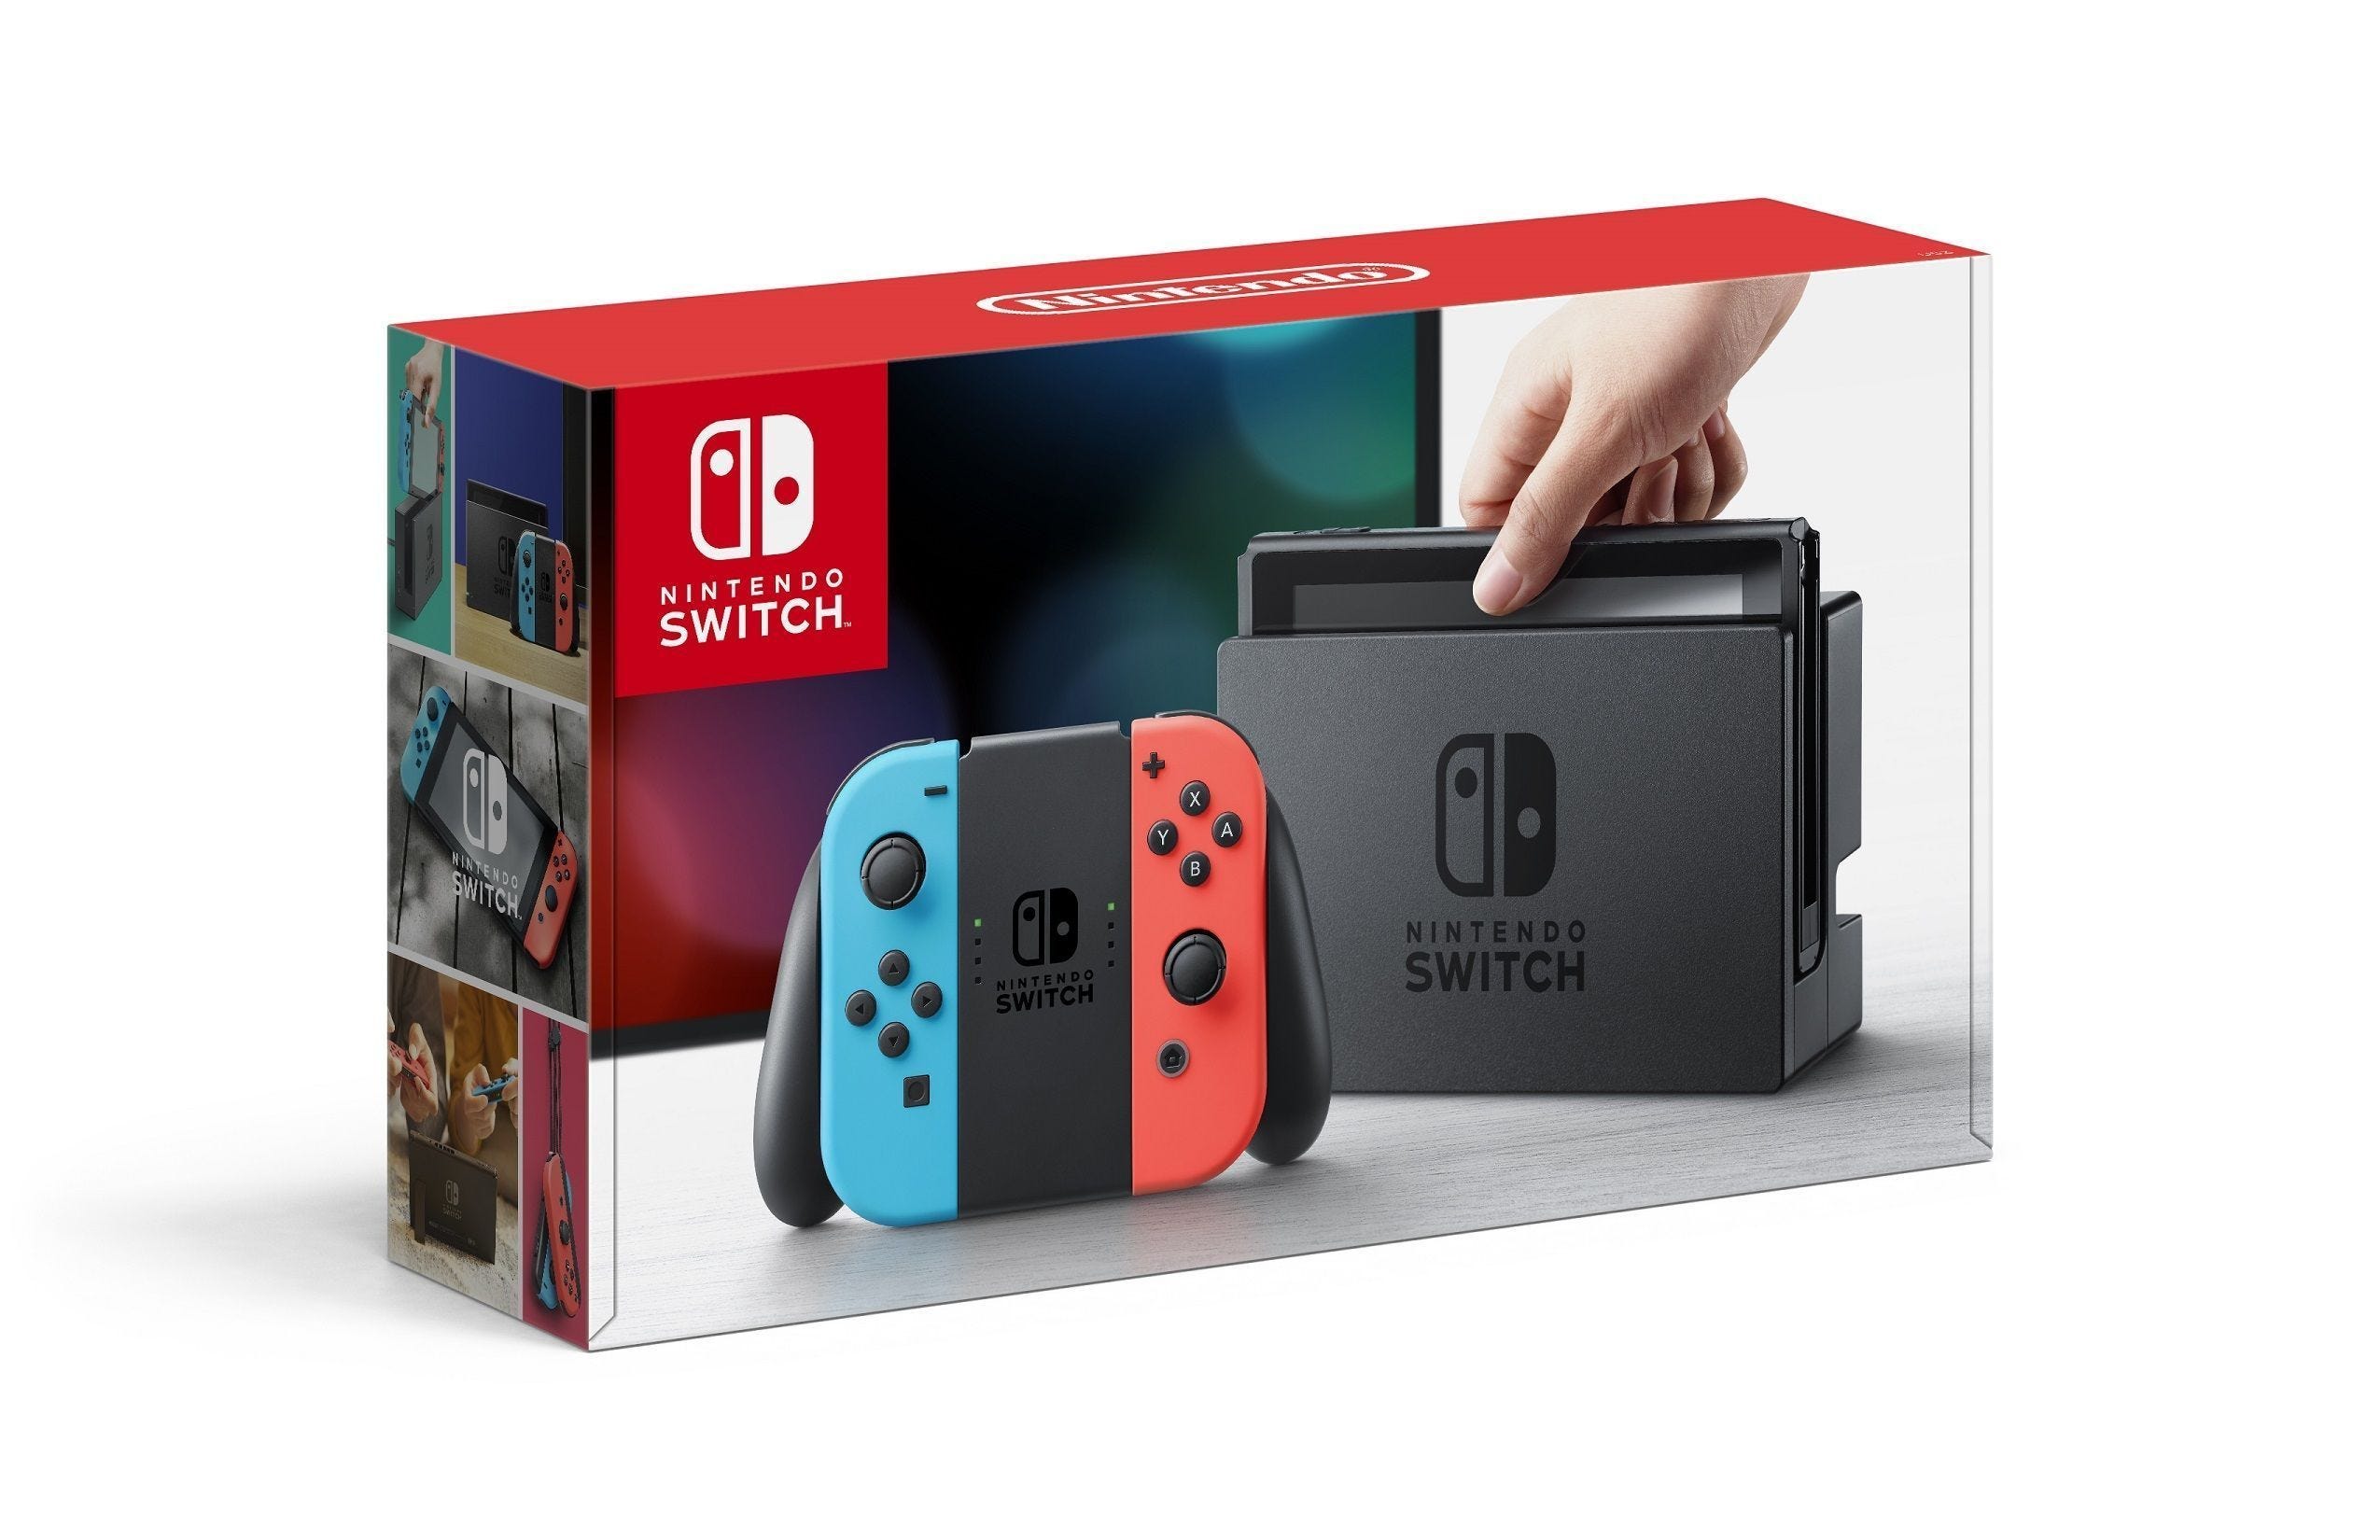 Nintendo Switch to launch March 3 for $300